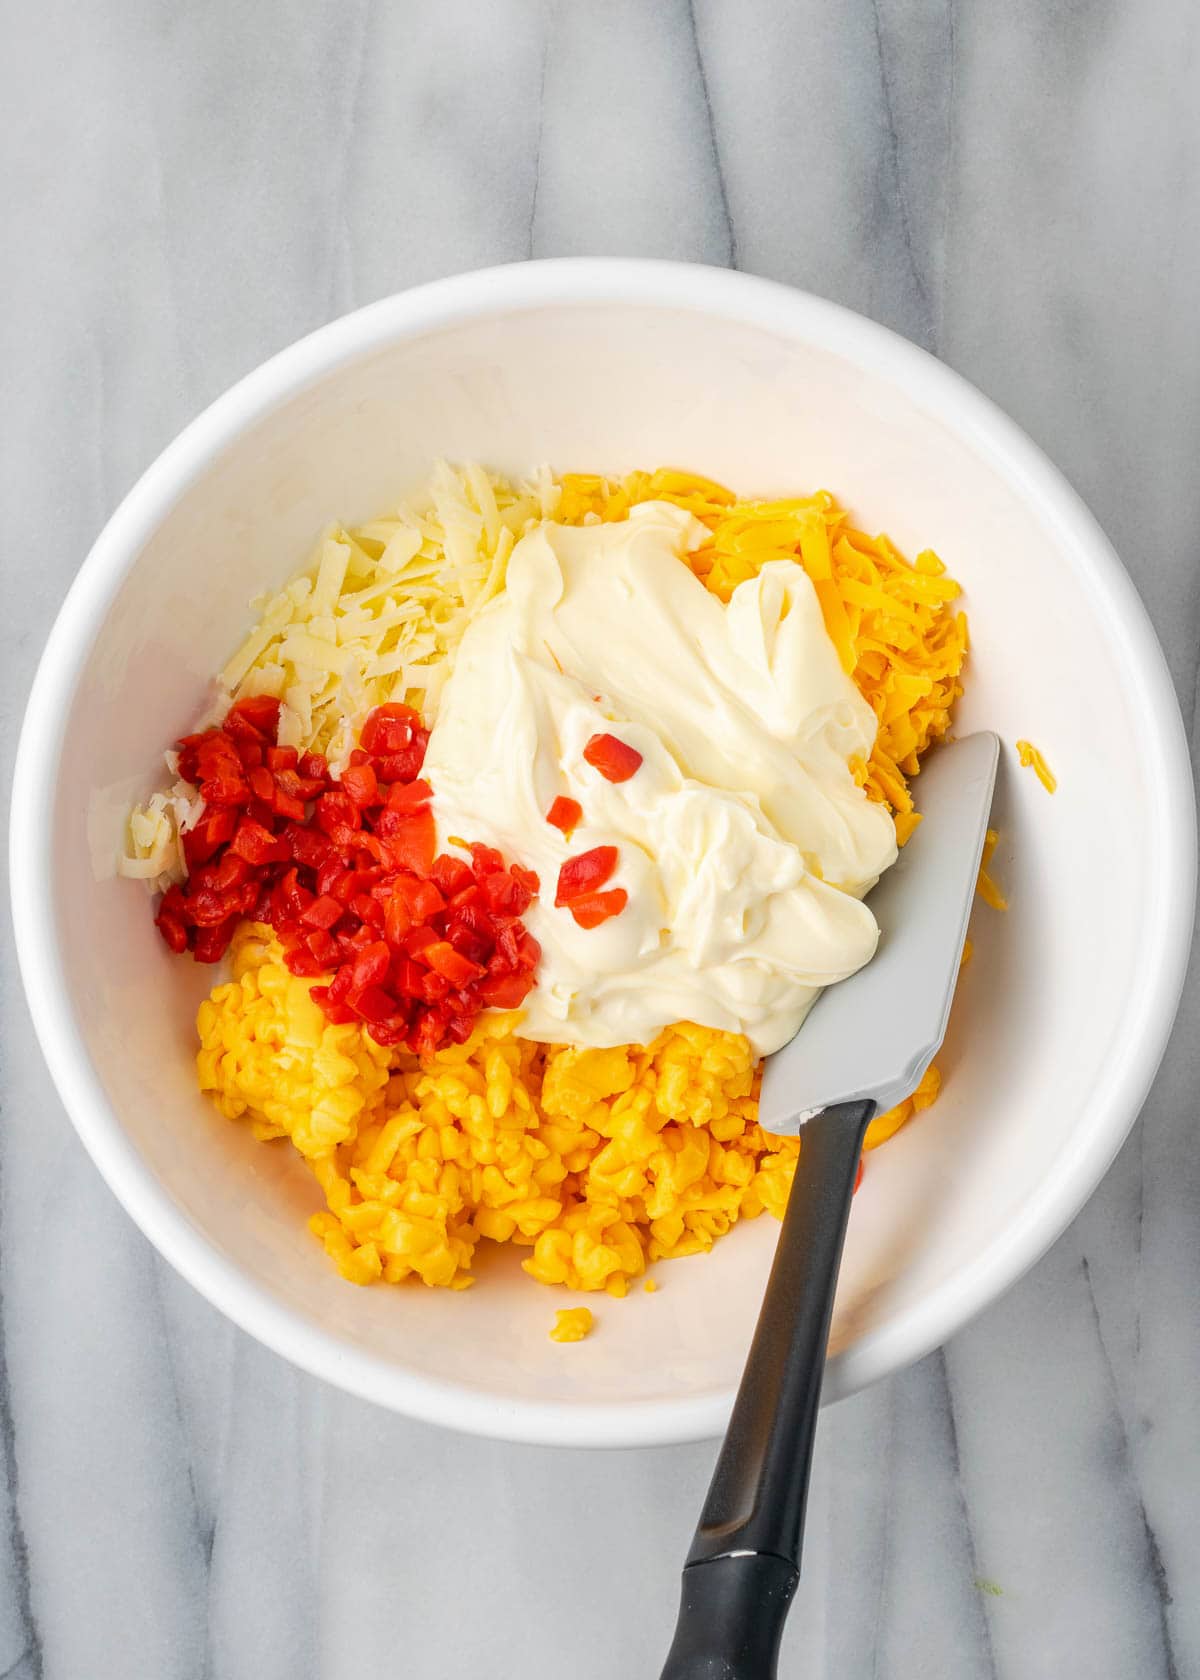 Pimento cheese ingredients being mixed in white mixing bowl